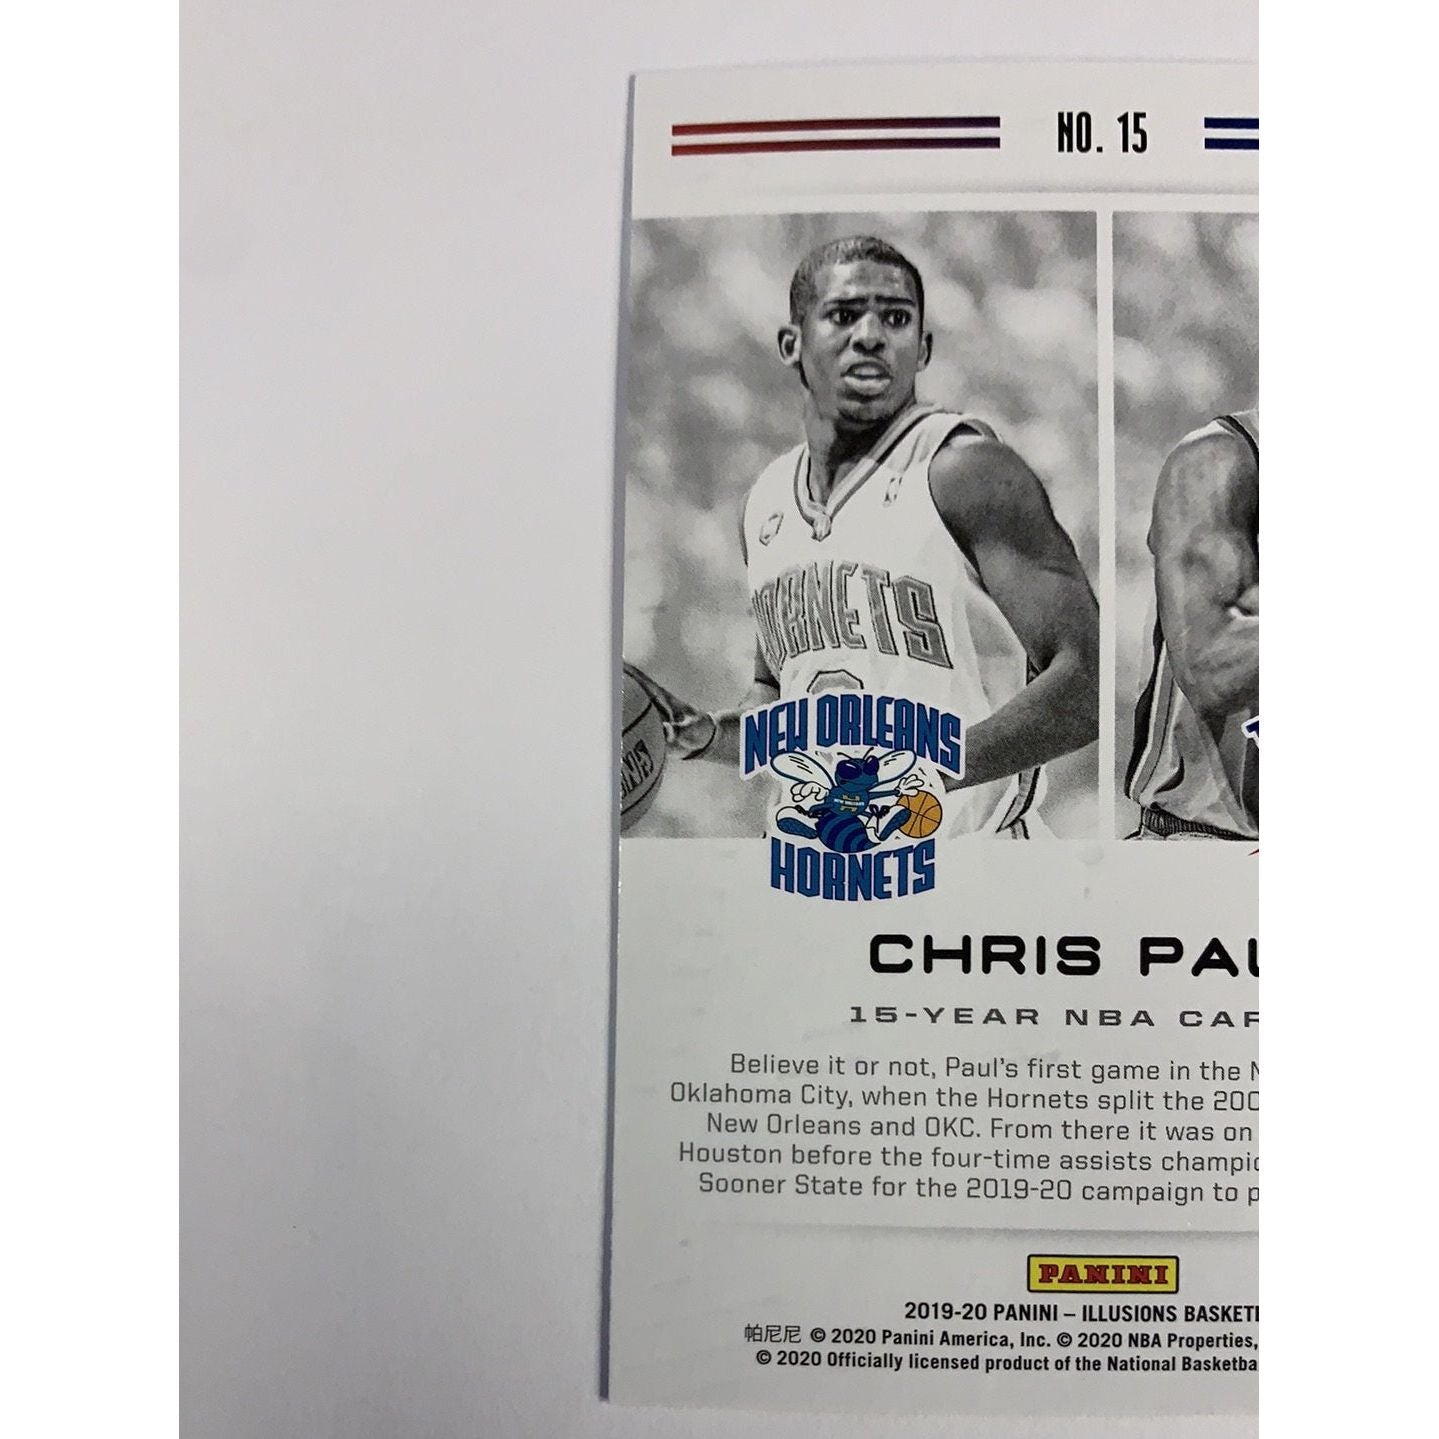  2019-20 Illusions Career Lineage Chris Paul  Local Legends Cards & Collectibles